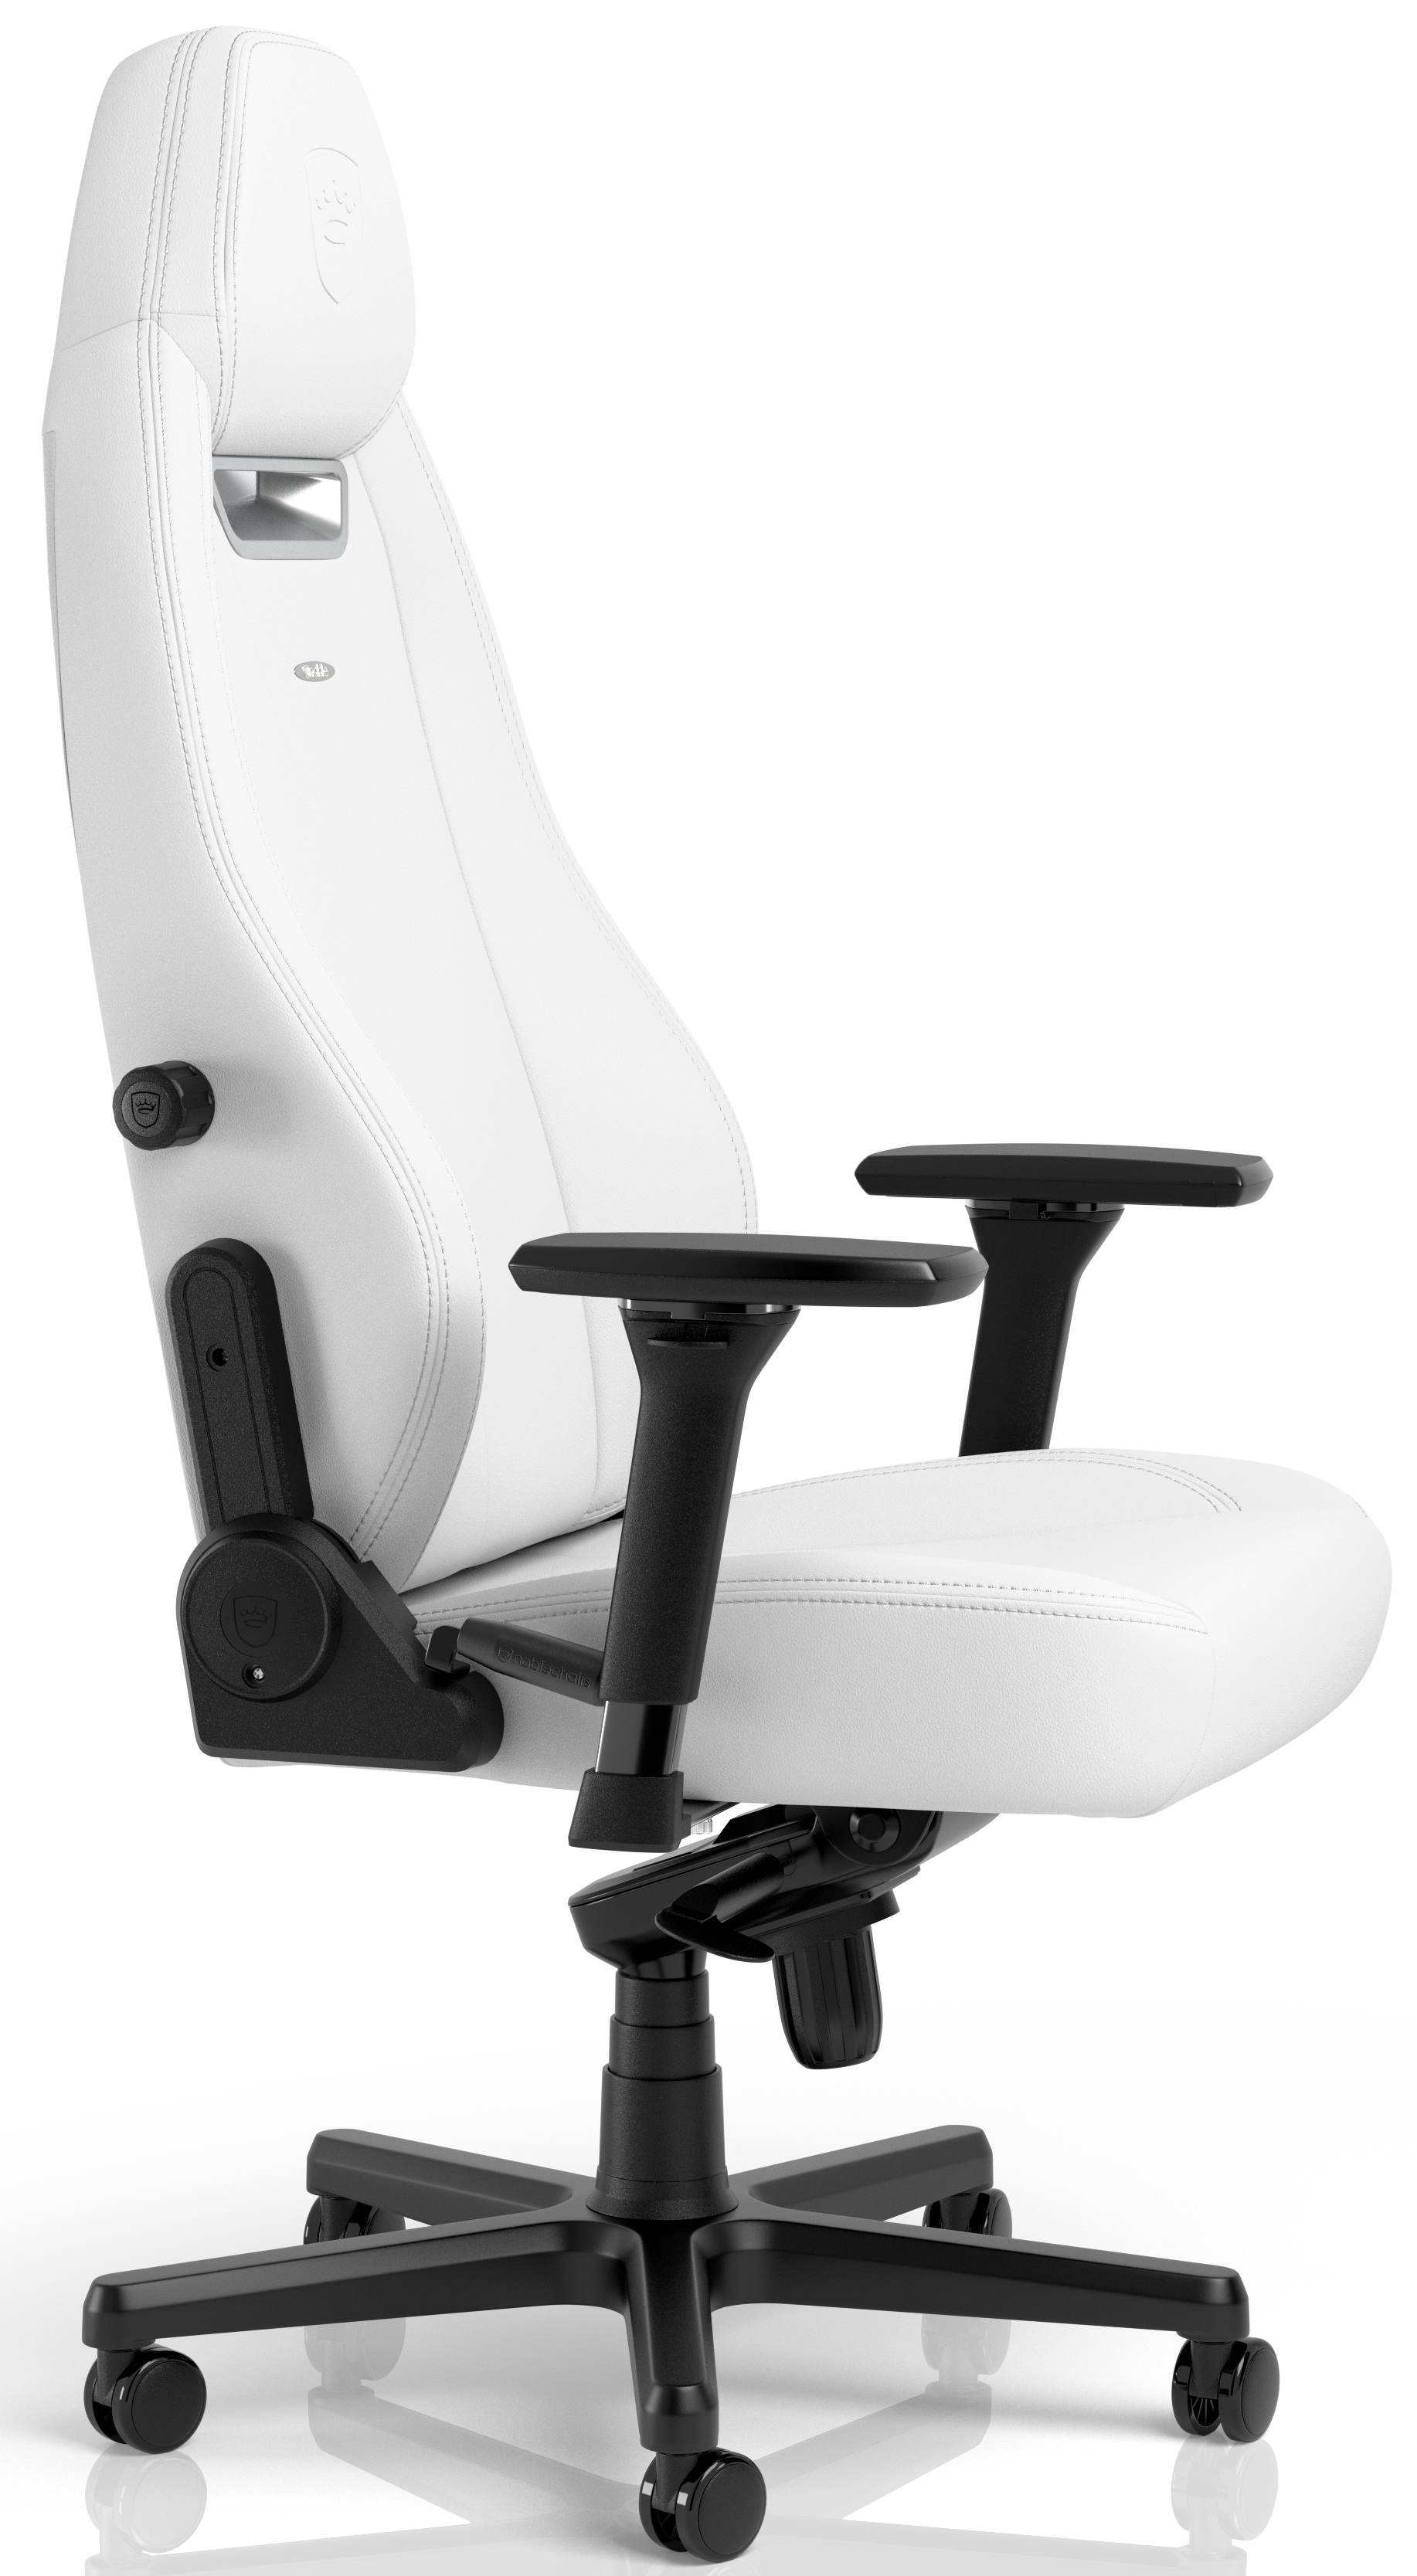 noblechairs - Silla noblechairs LEGEND - White Edition